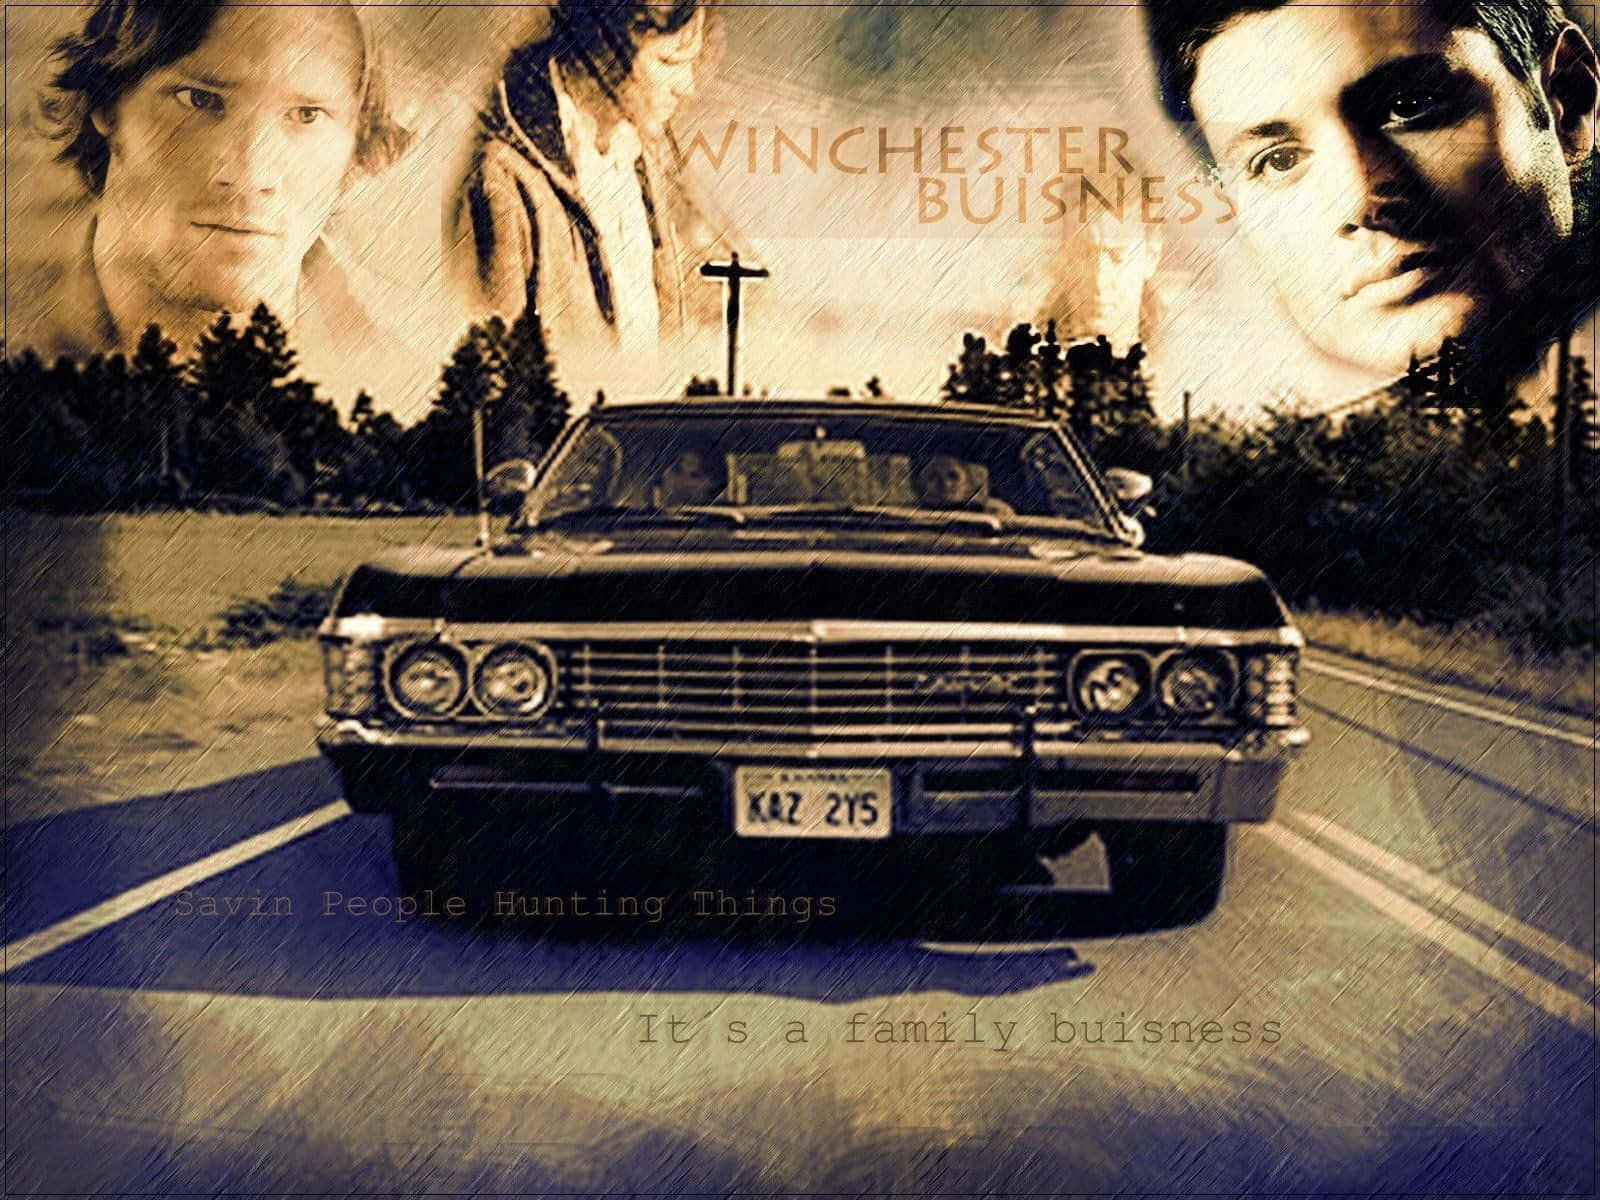 Sam and Dean Winchester, ready for their next adventure.